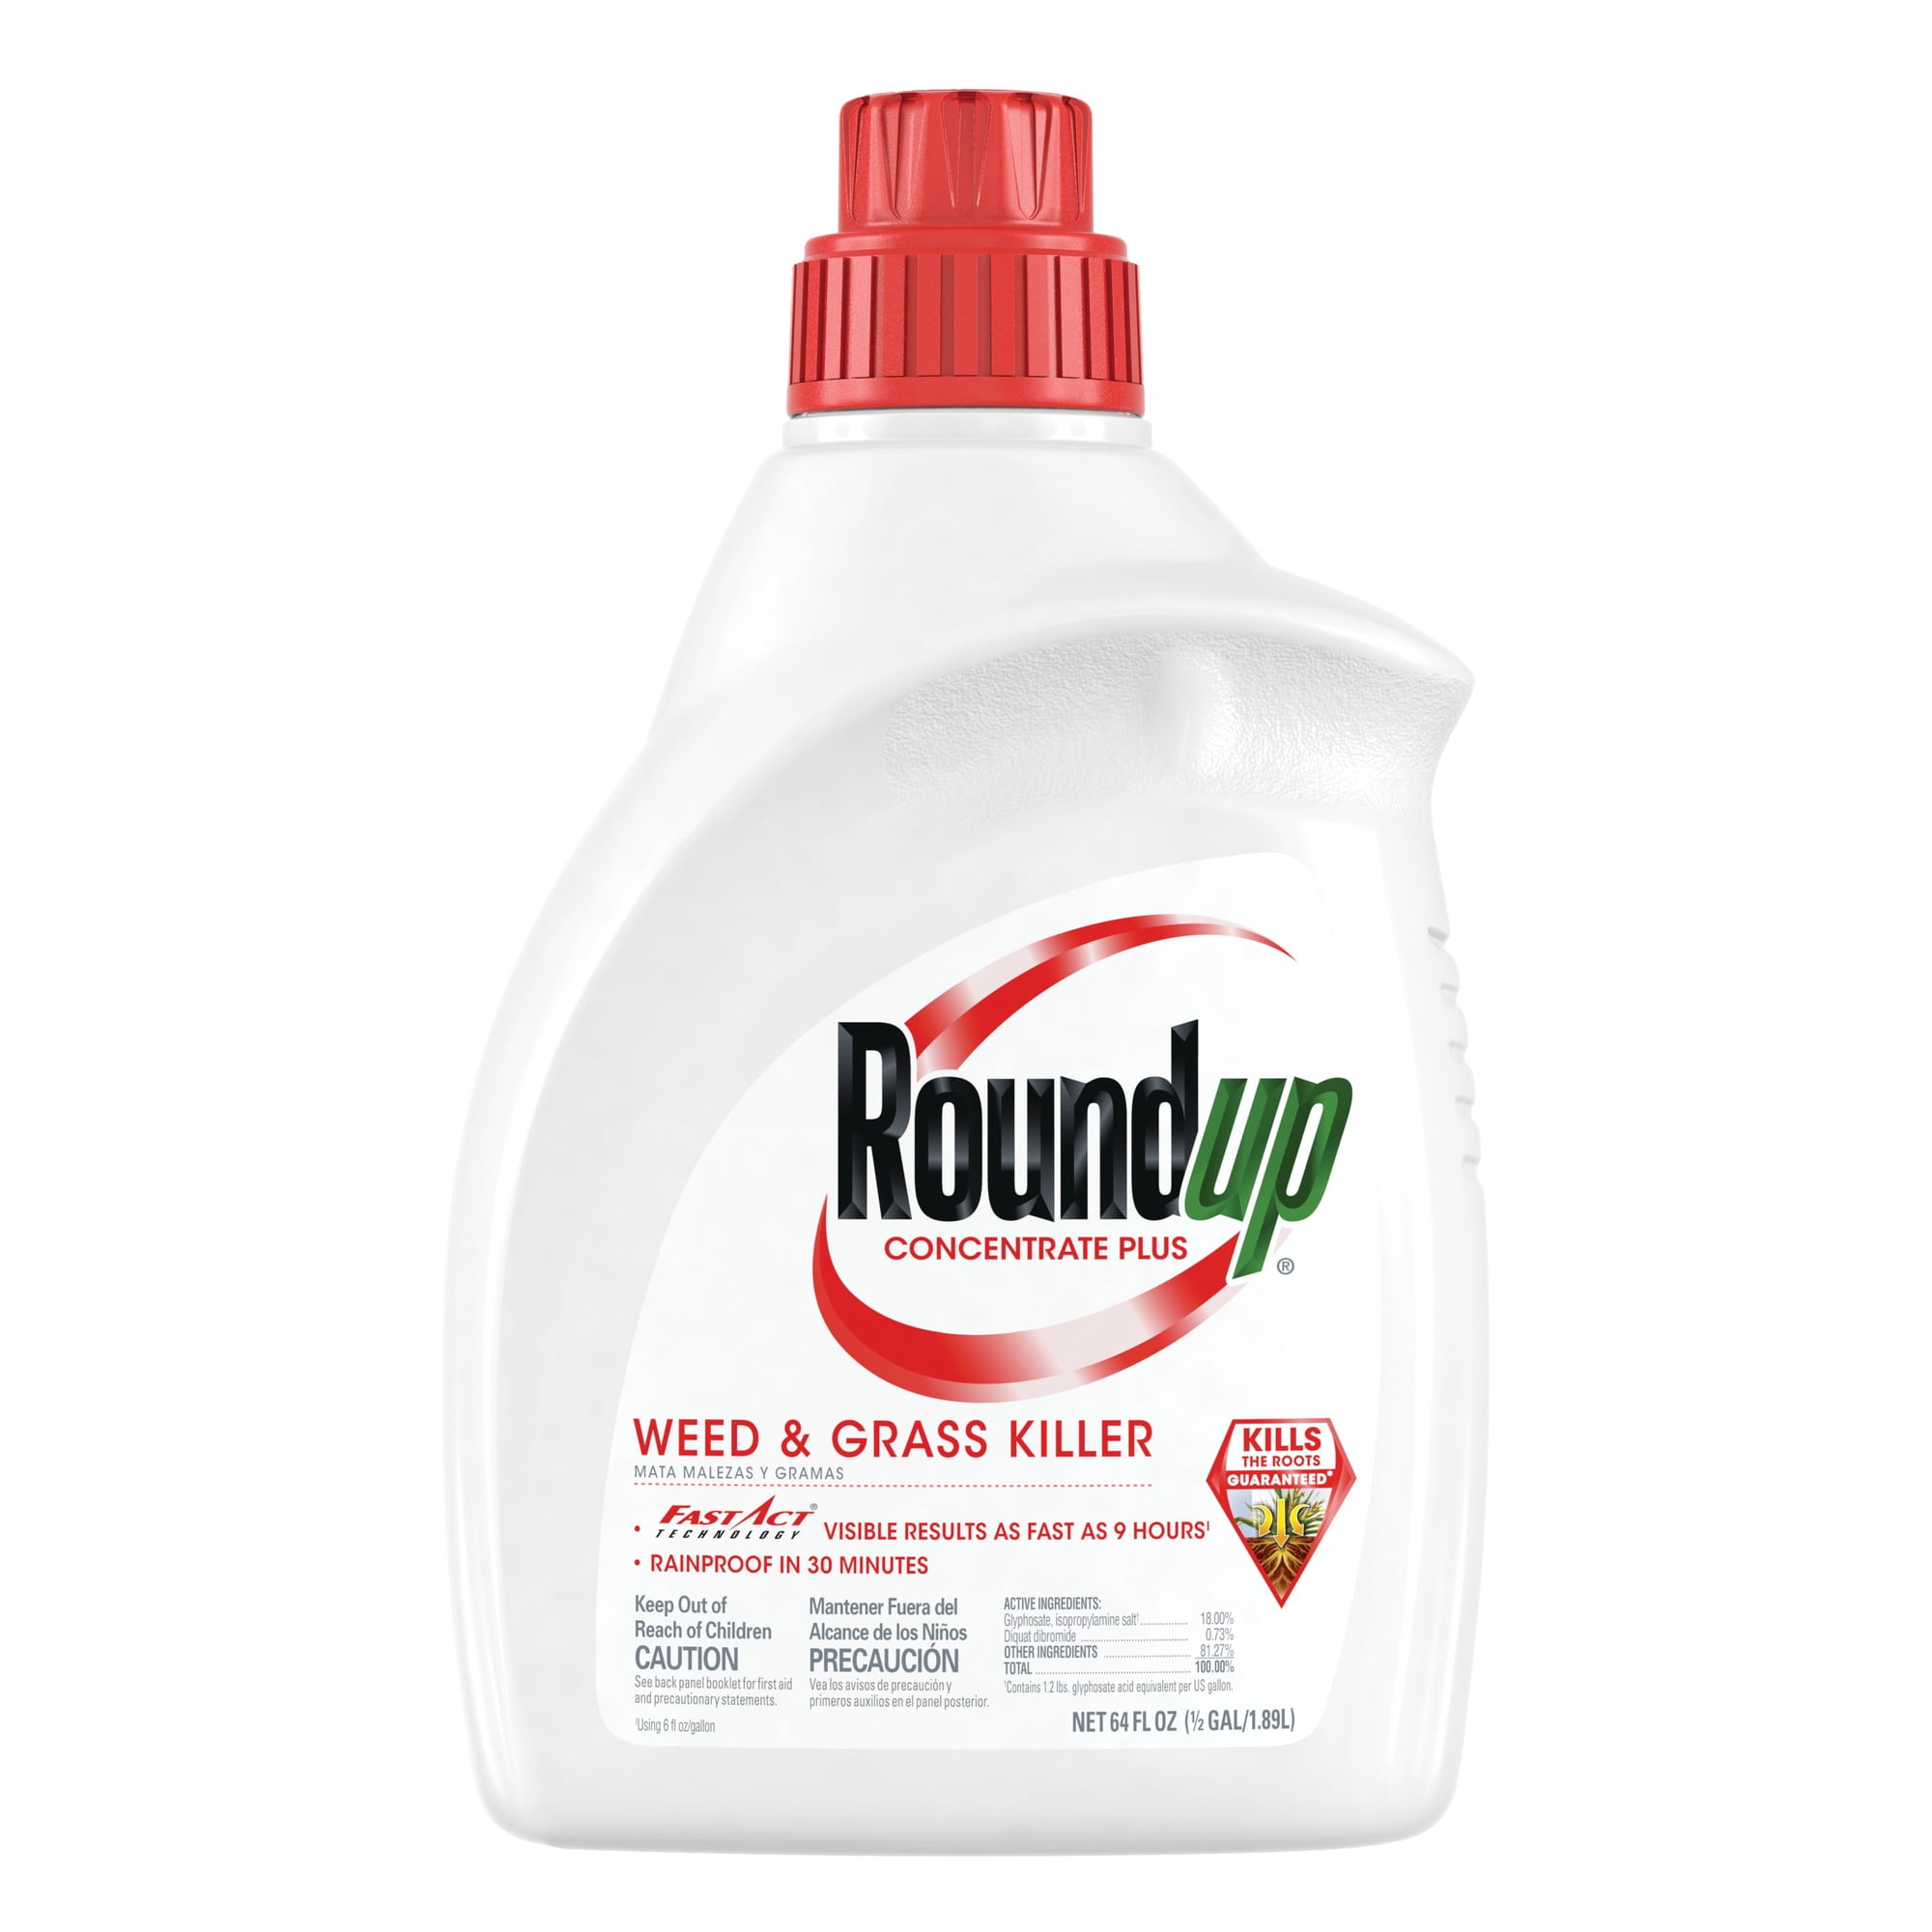 Roundup Concentrate Plus Weed and Grass Killer, 64 oz.